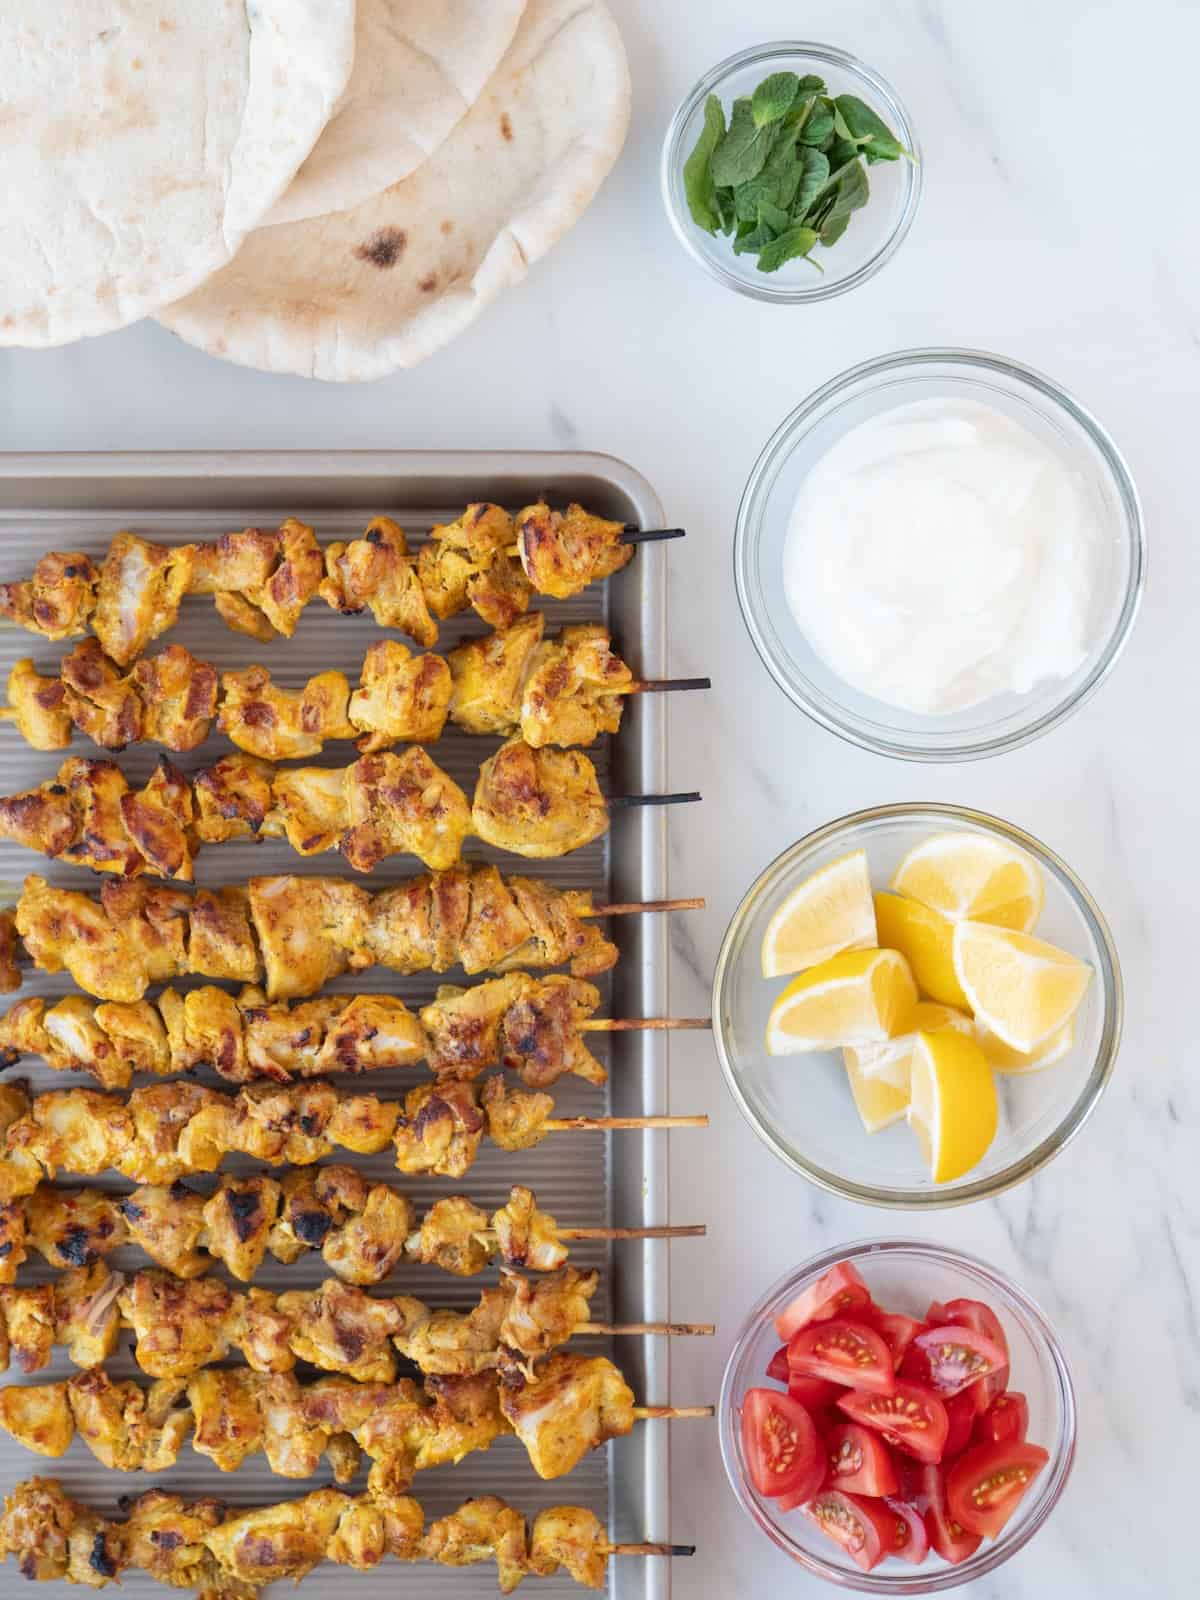 A baking sheet with moroccan chicken skewers, with pita and four small glass mixing bowls, with lemon wedges, chopped tomatoes, greek yogurt and fresh mint leaves.